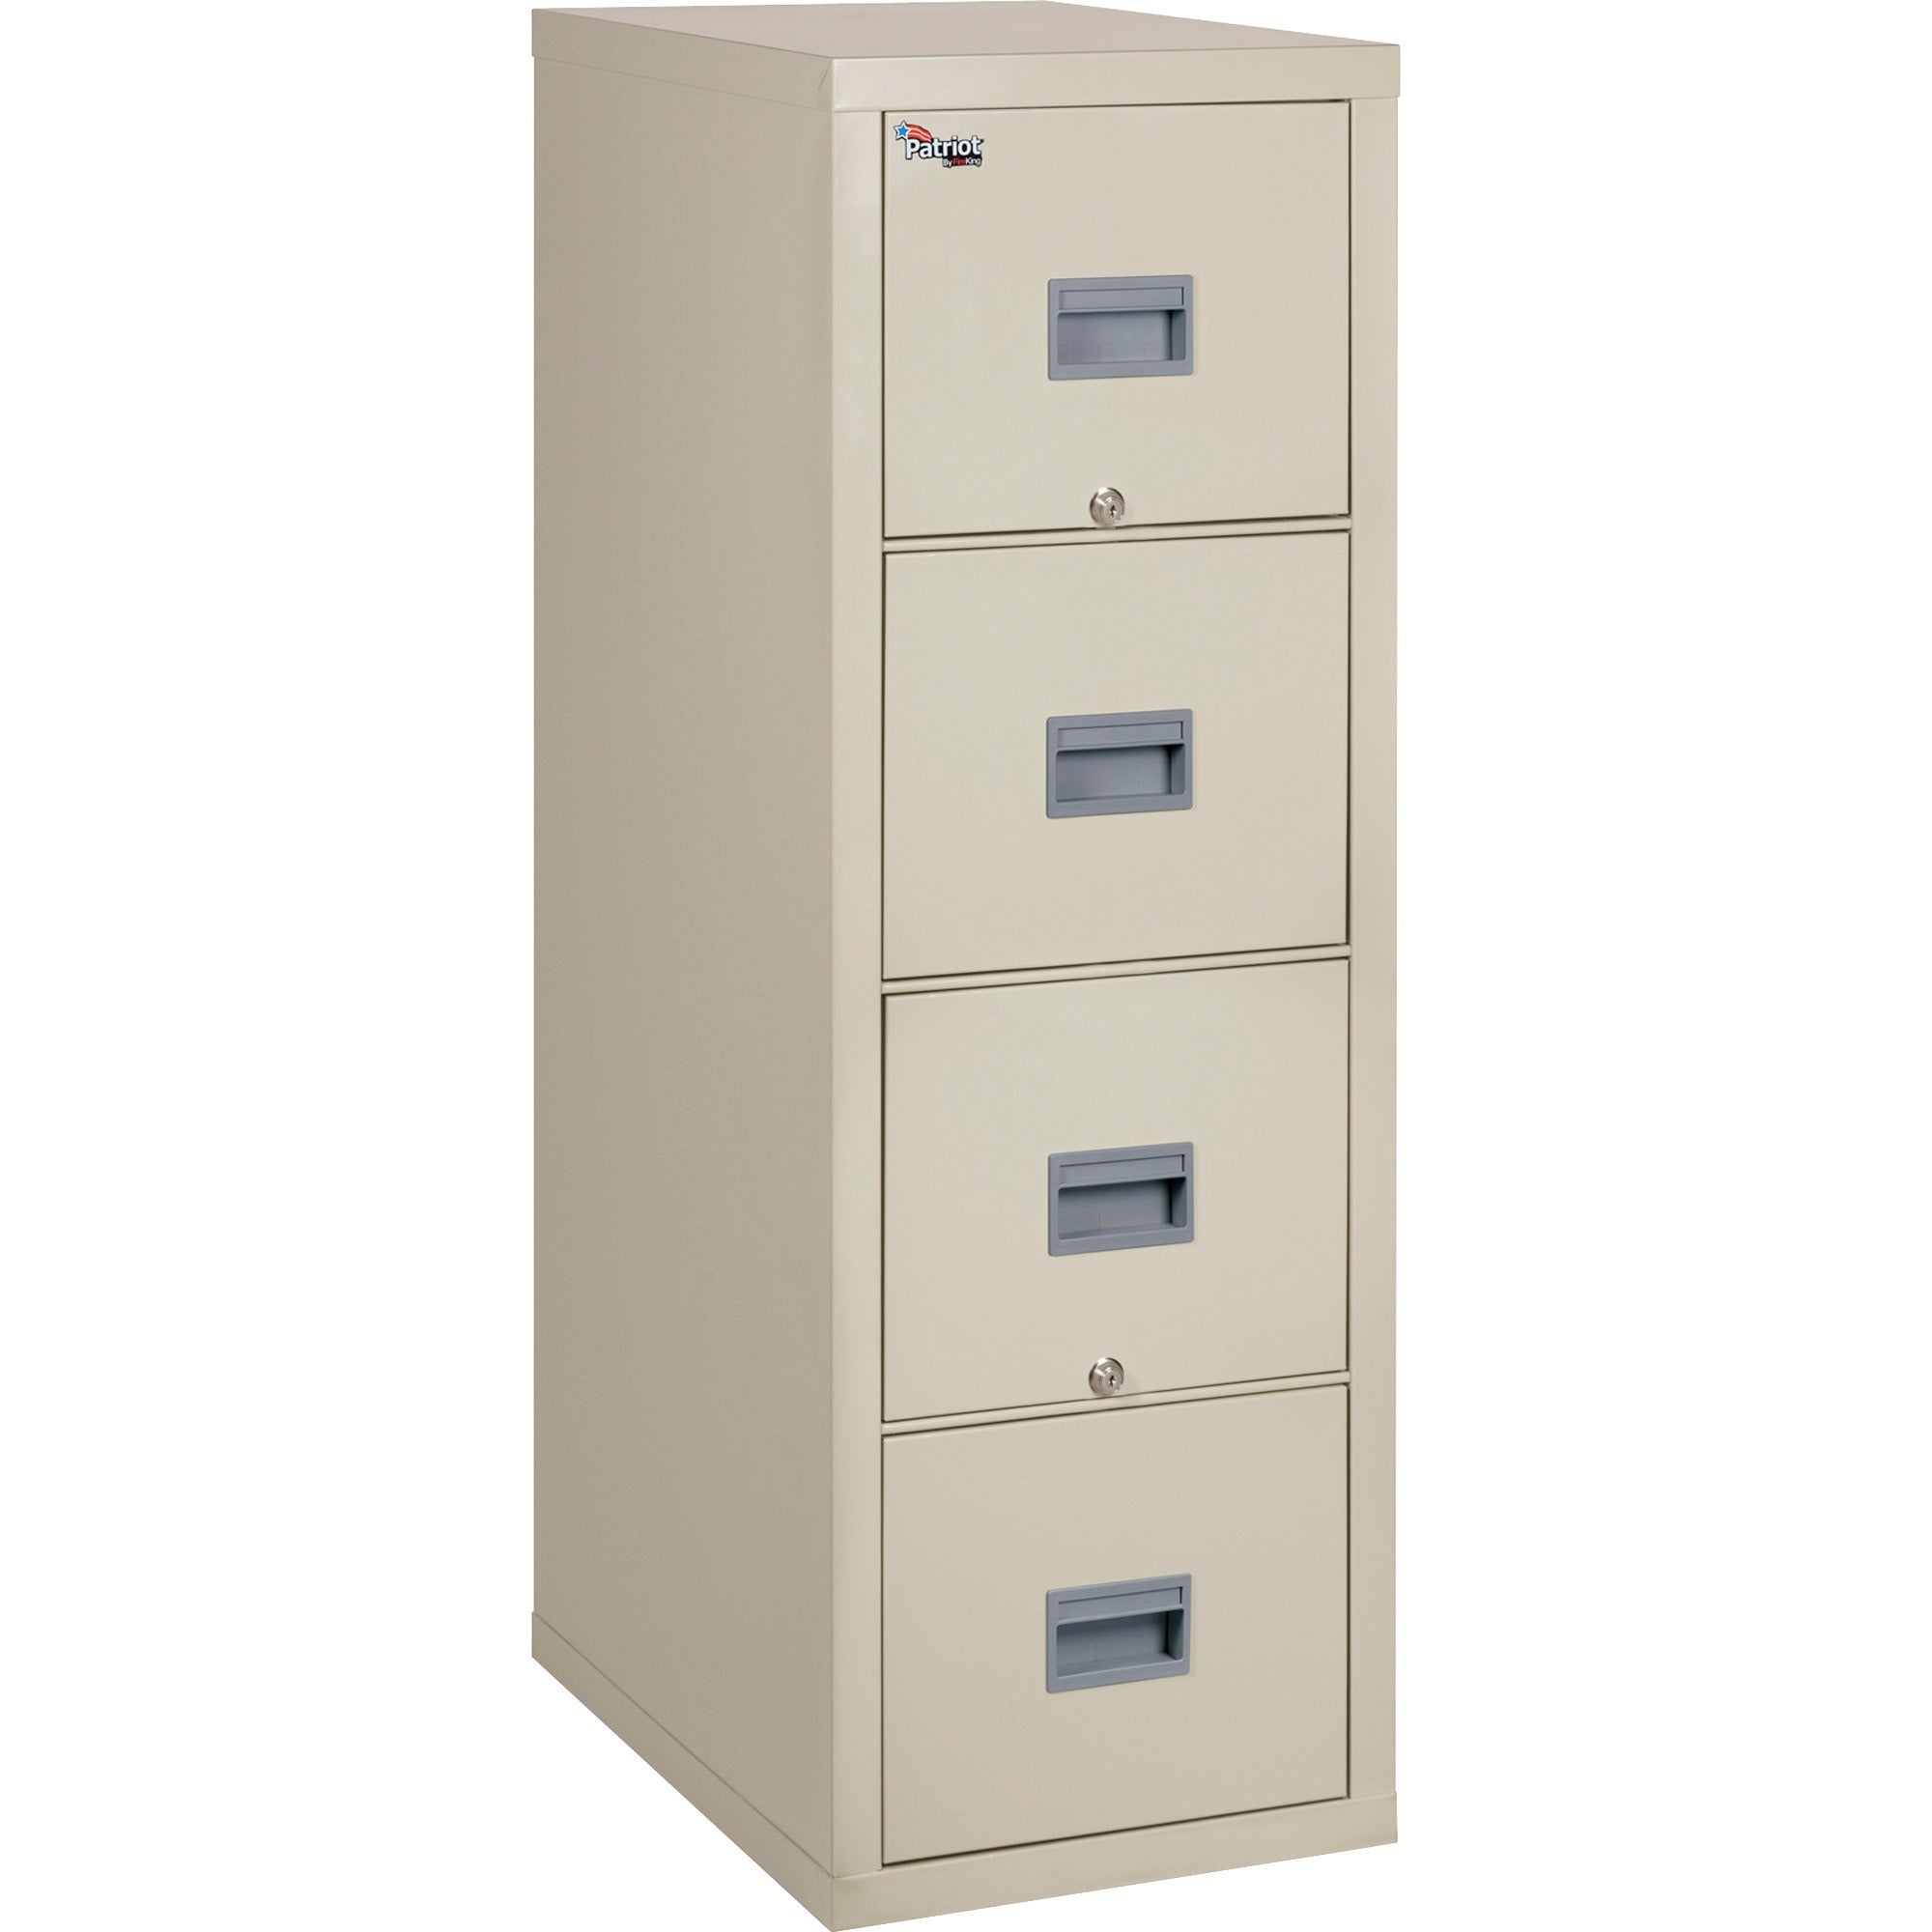 FireKing Patriot Series 4-Drawer Vertical Fire Files - 20.8" x 31.6" x 52.8" - 4 x Drawer(s) for File - Legal - Vertical - Fire Proof, Impact Resistant, Locking Drawer, Scratch Resistant, Recessed Handle, Ball Bearing Slide - Parchment - Gypsum, Stee